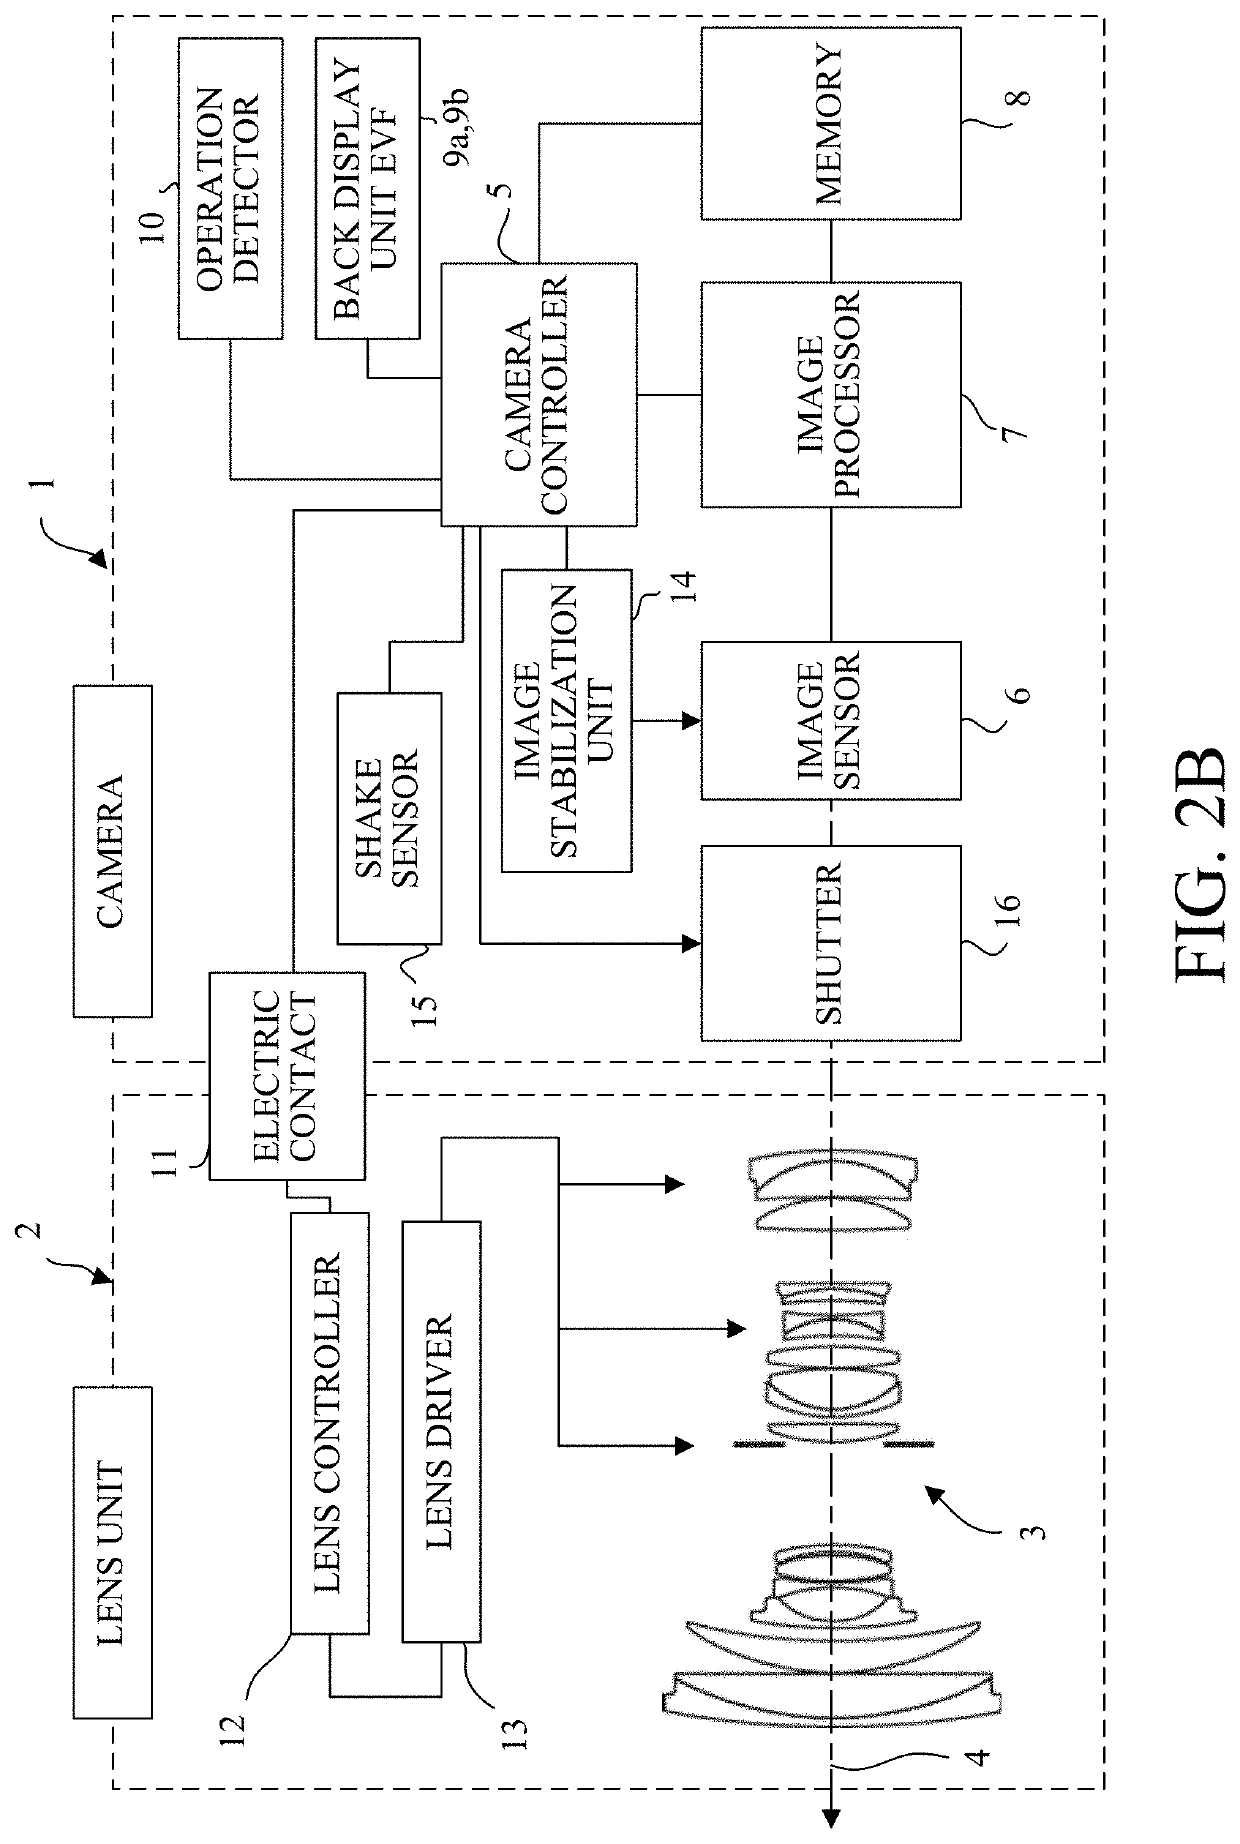 Image pickup apparatus and its control method